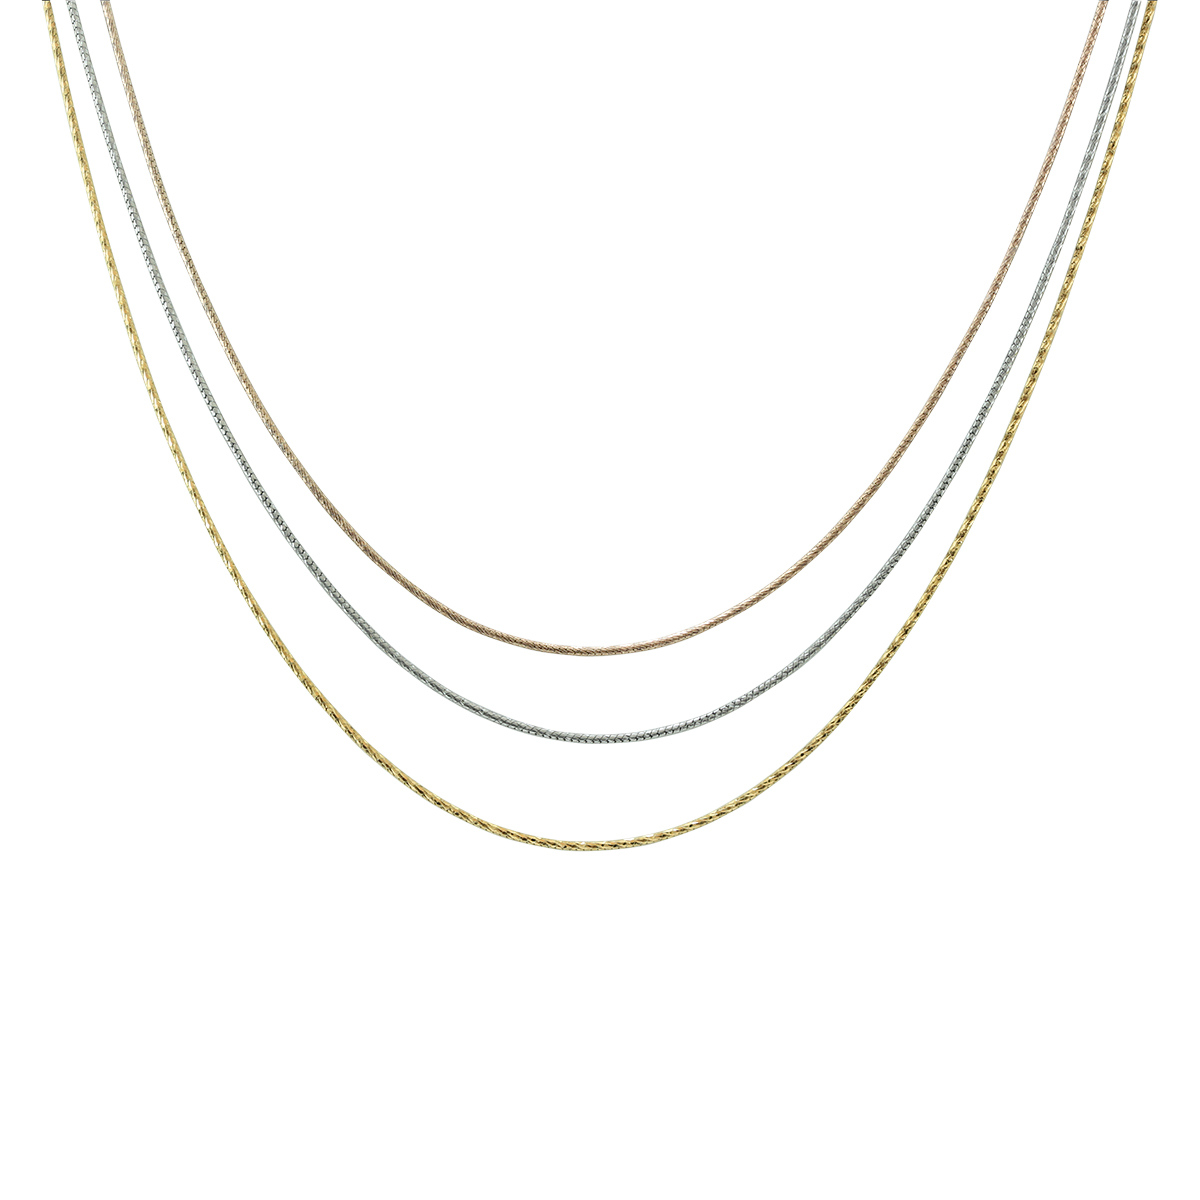 Triple Strand Three Tone Necklace in .925 Sterling Silver